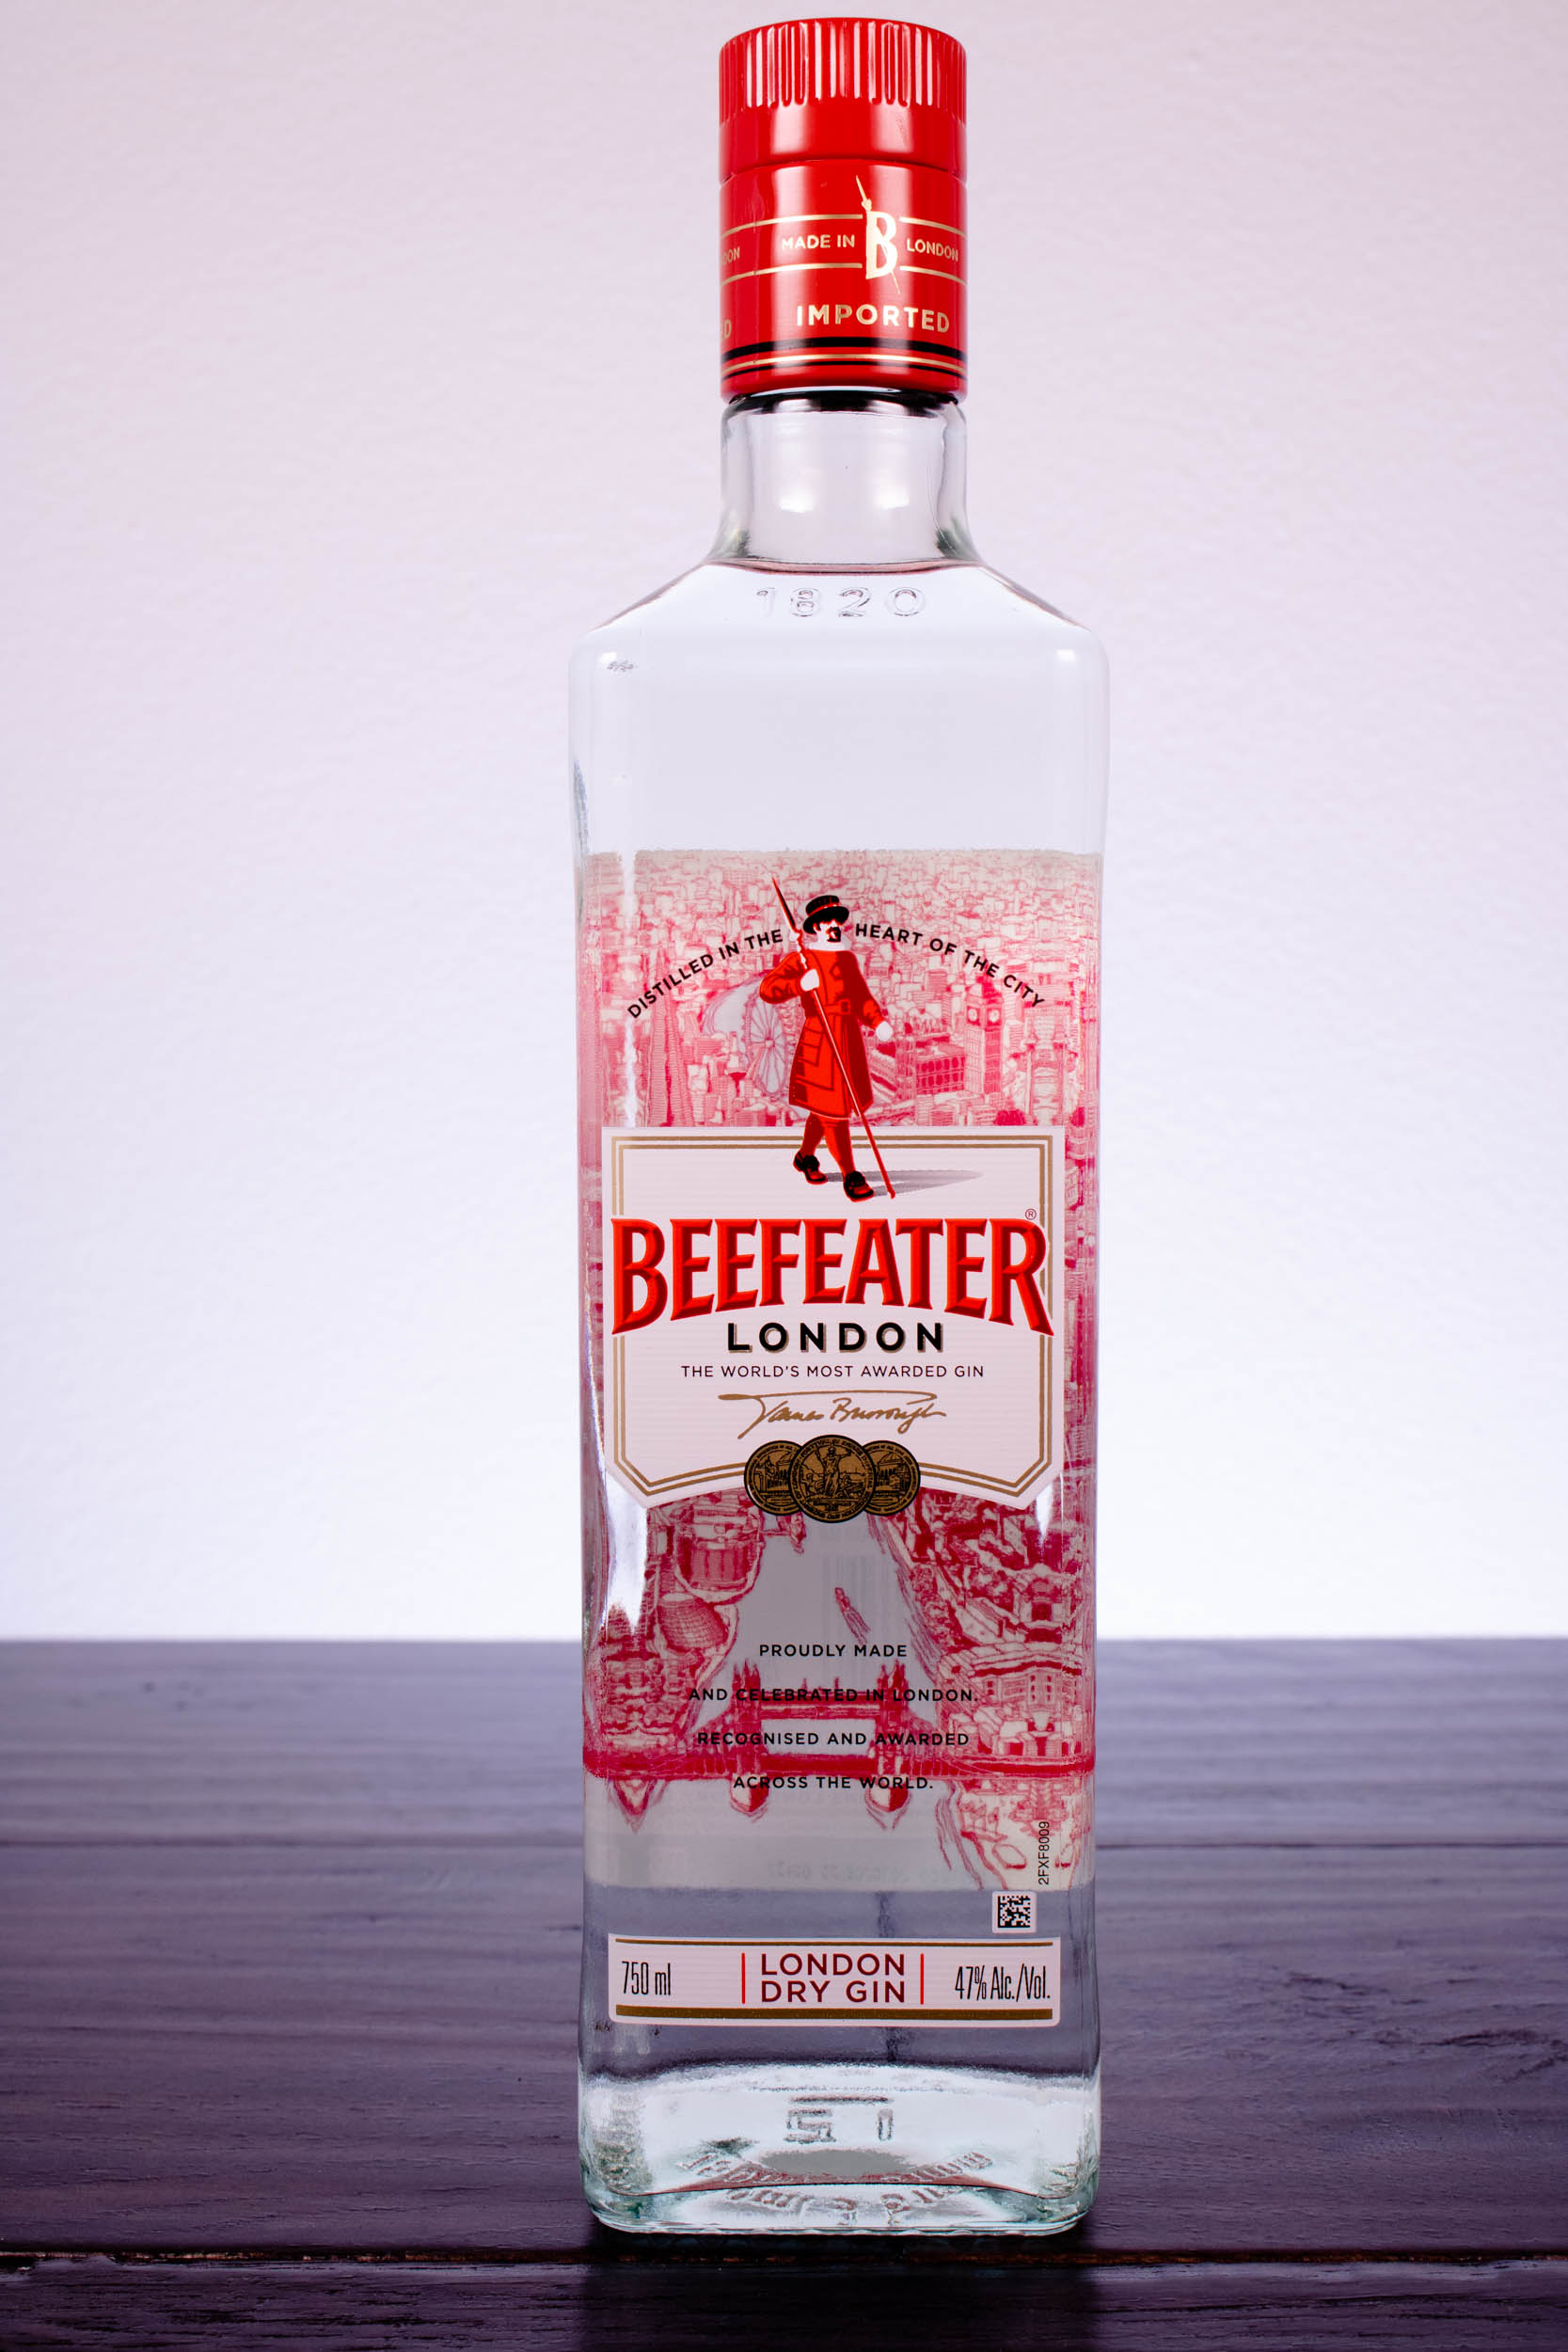 https://www.firstpourcocktails.com/wp-content/uploads/2020/03/Beefeater-London-Dry-Gin.jpg